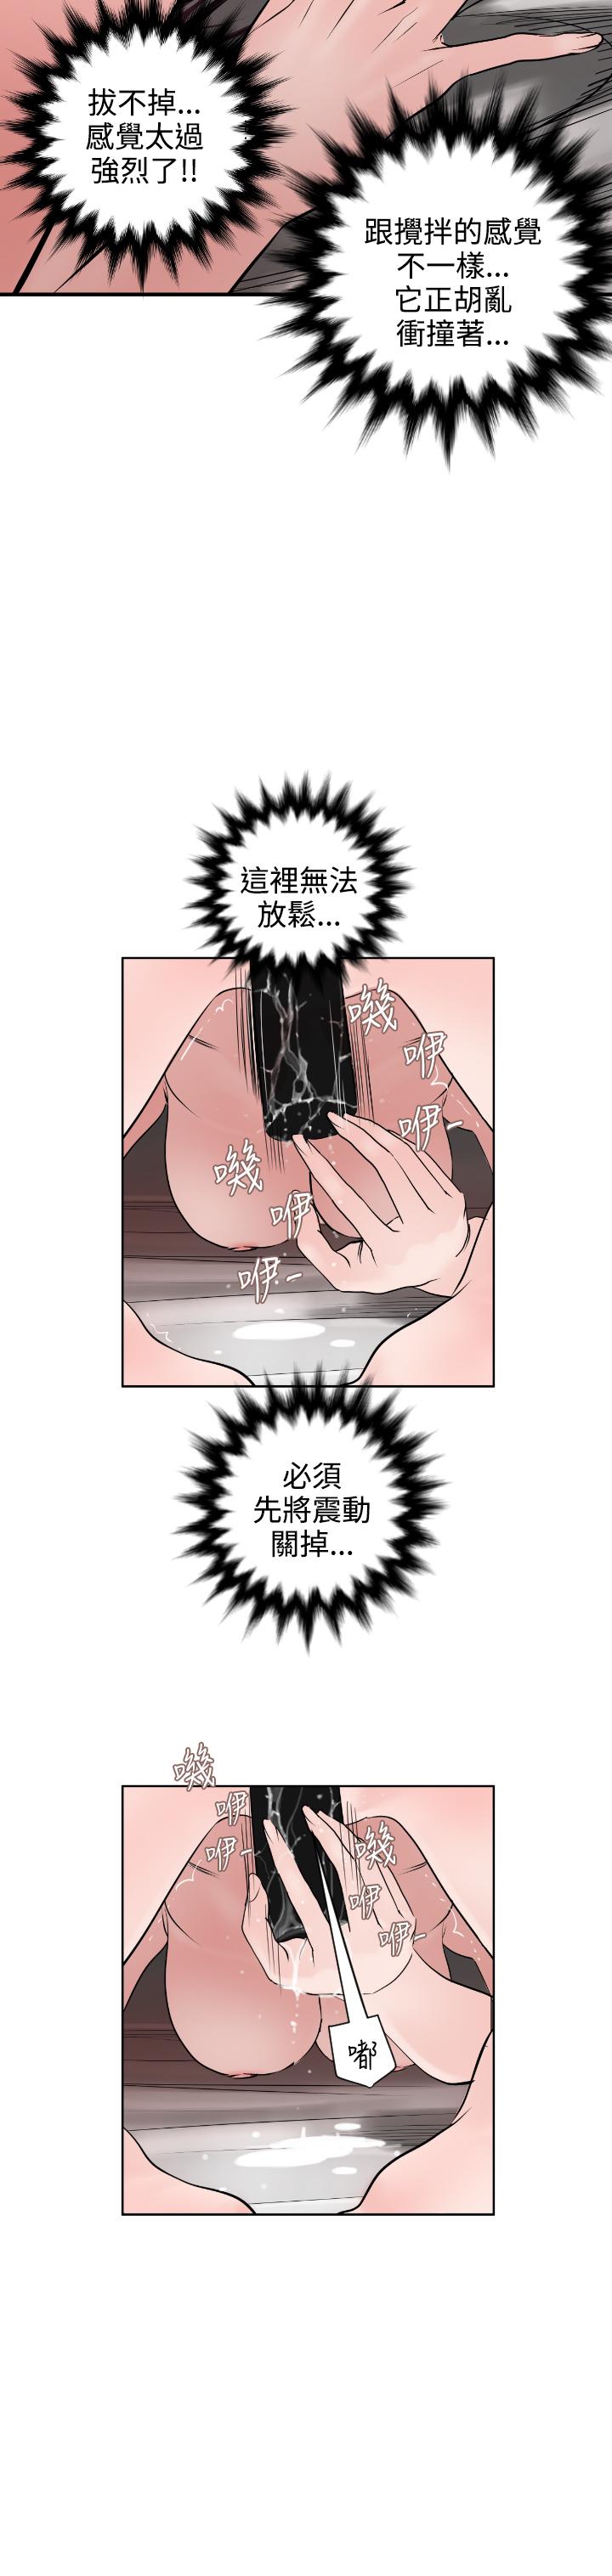 Desire King (慾求王) Ch.1-16 (chinese) 224